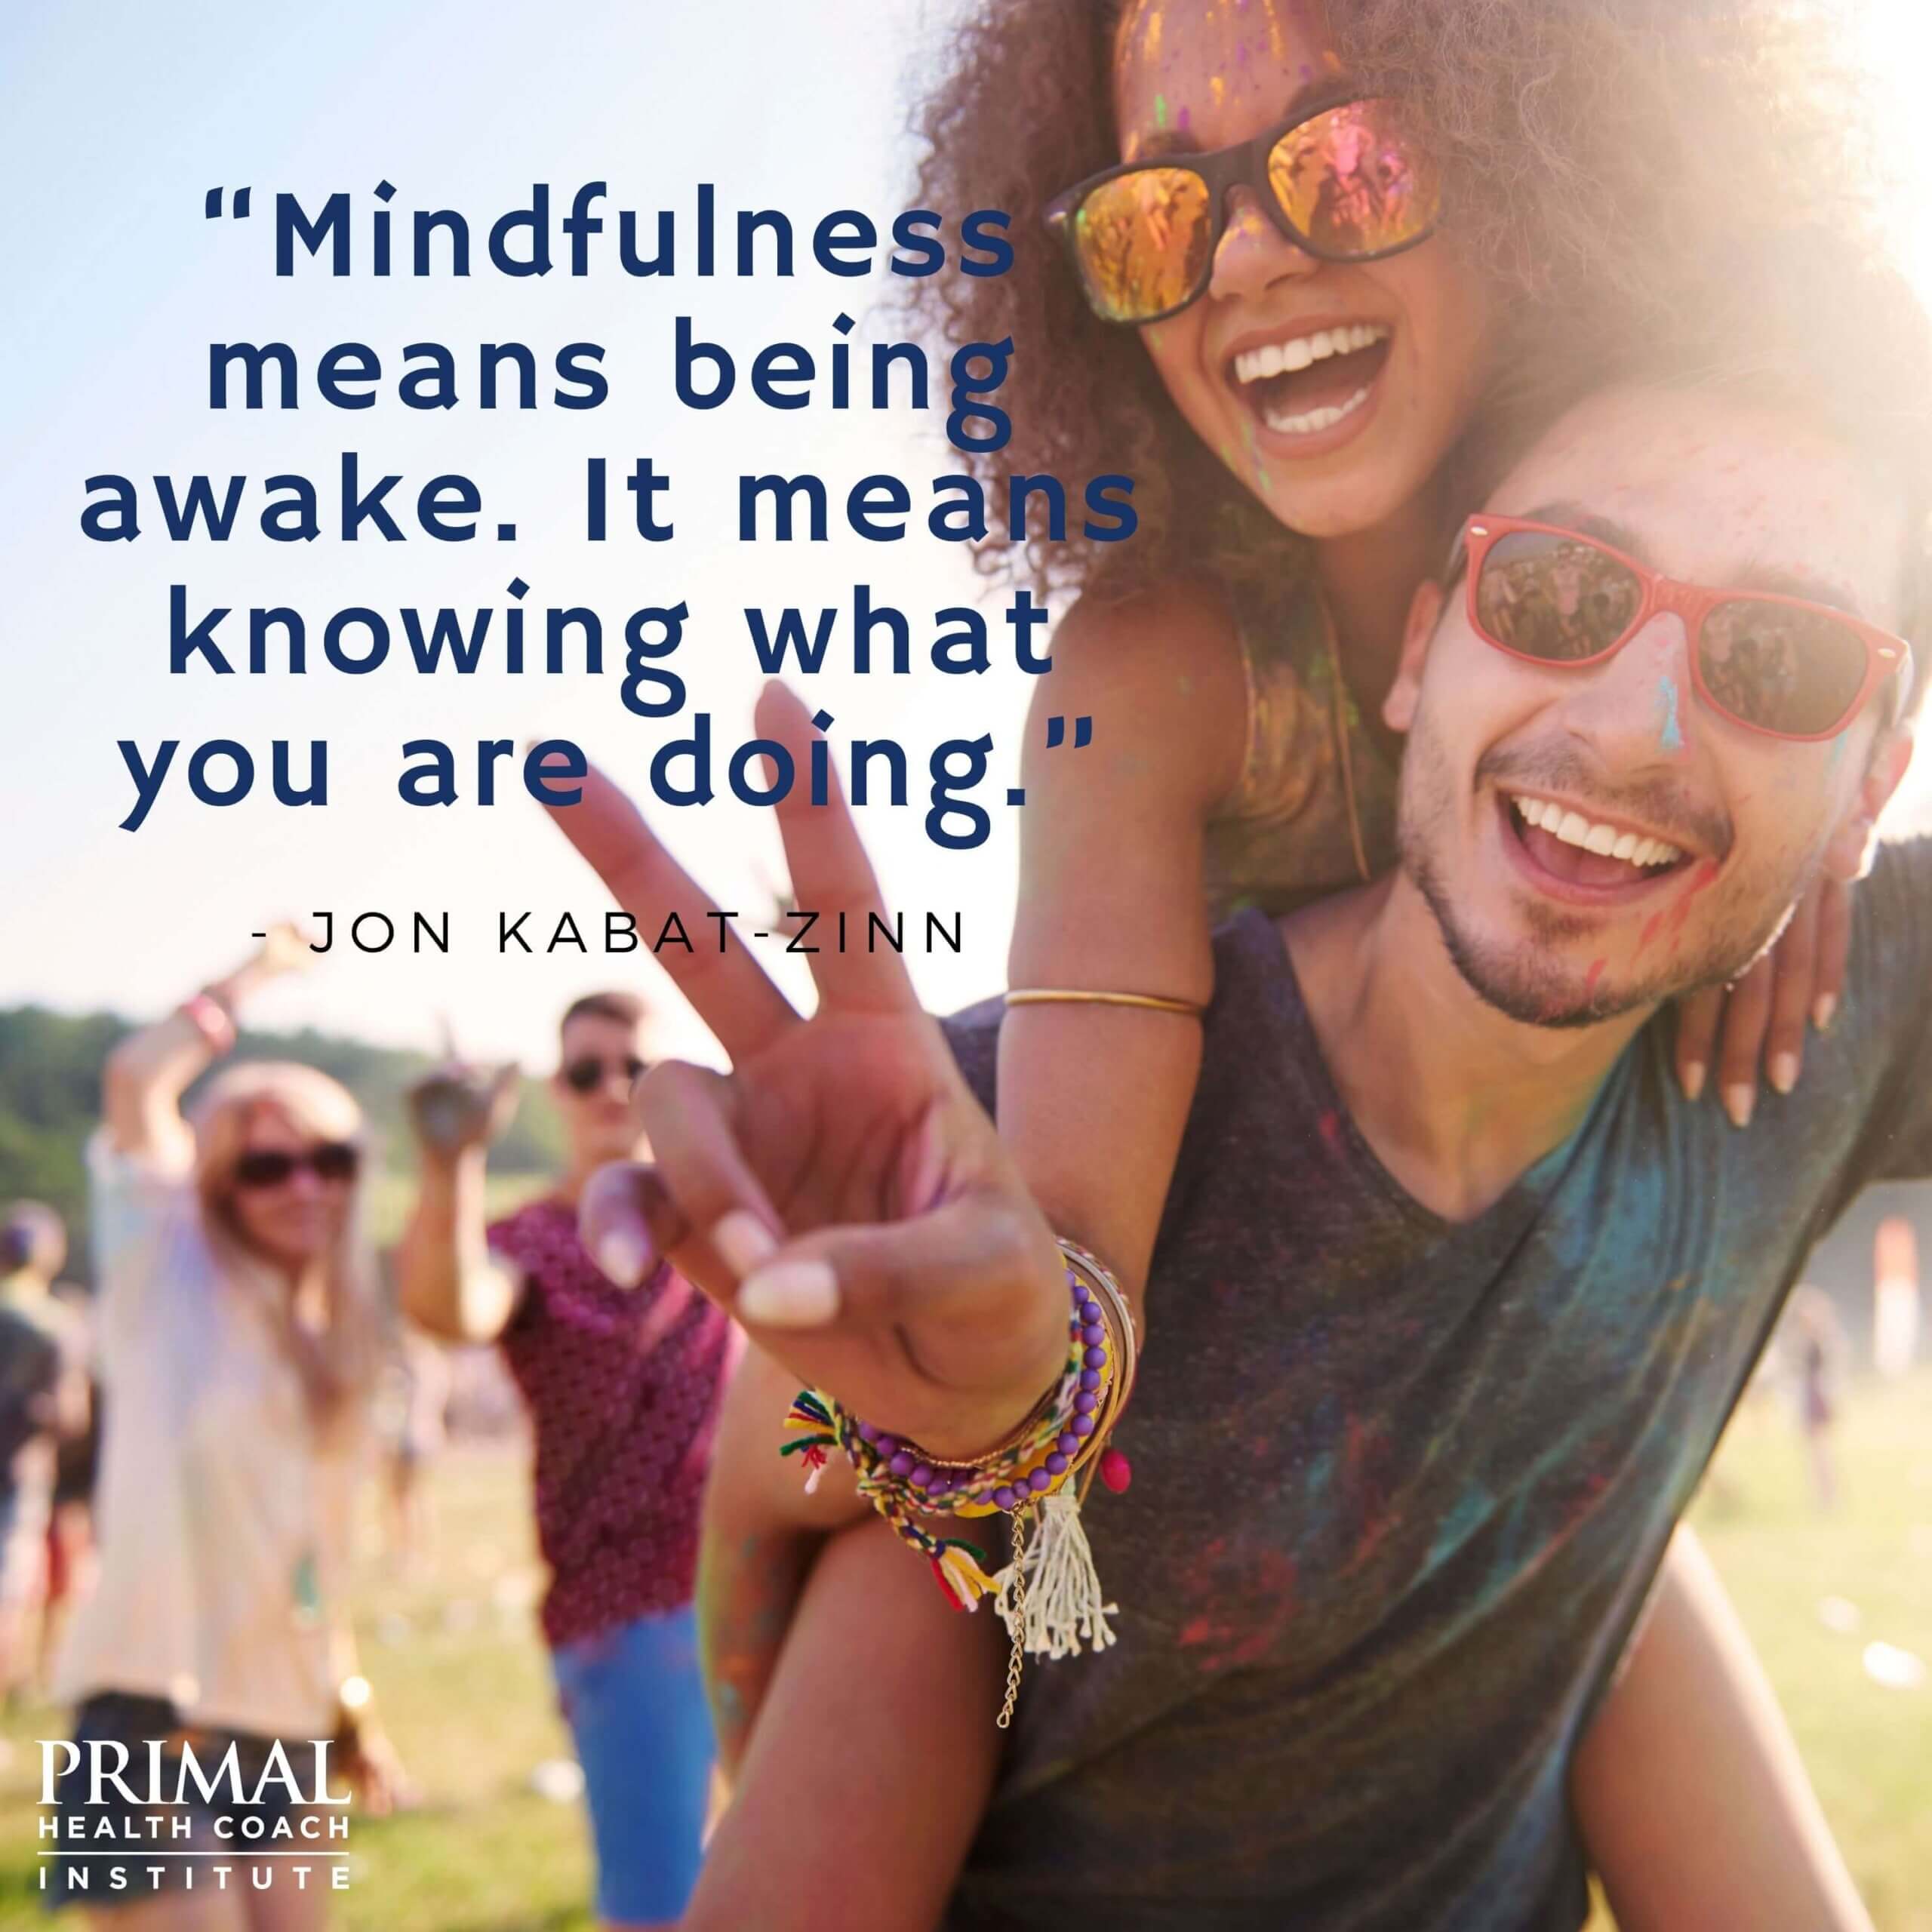 “Mindfulness means being awake. It means knowing what you are doing.” - Jon Kabat-Zinn